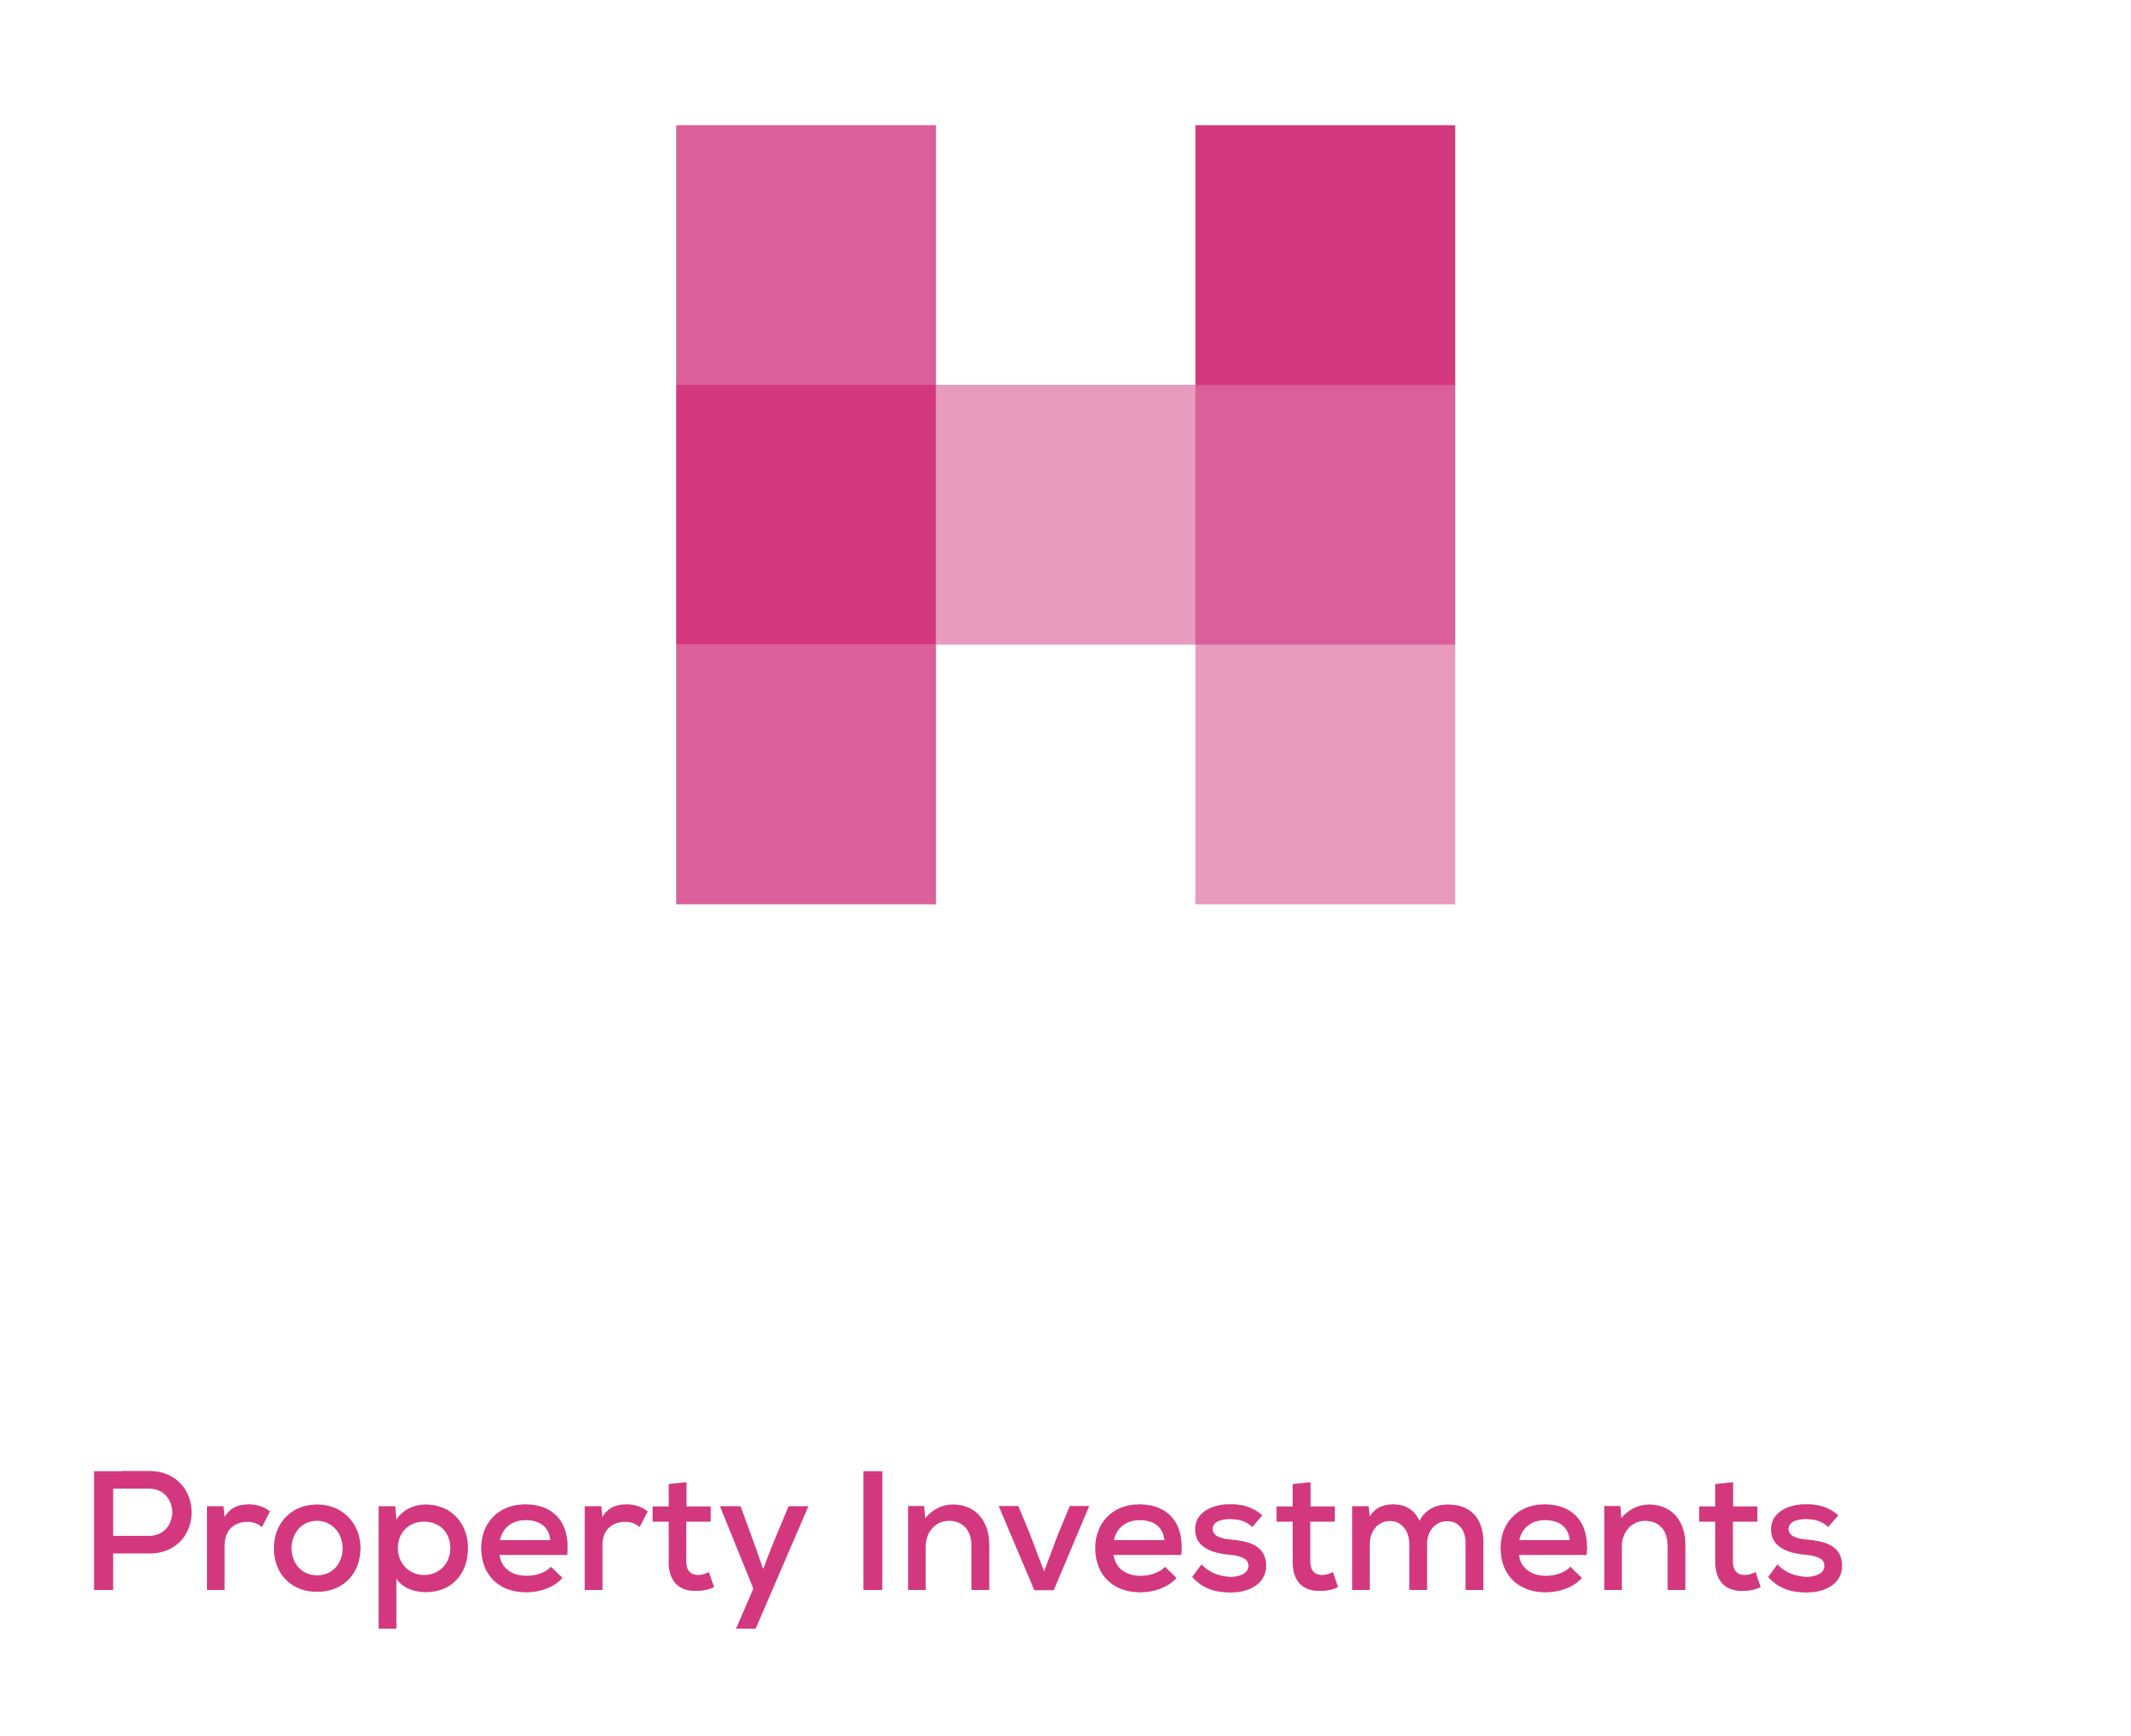 Hattersley Property Investments logo white and pink